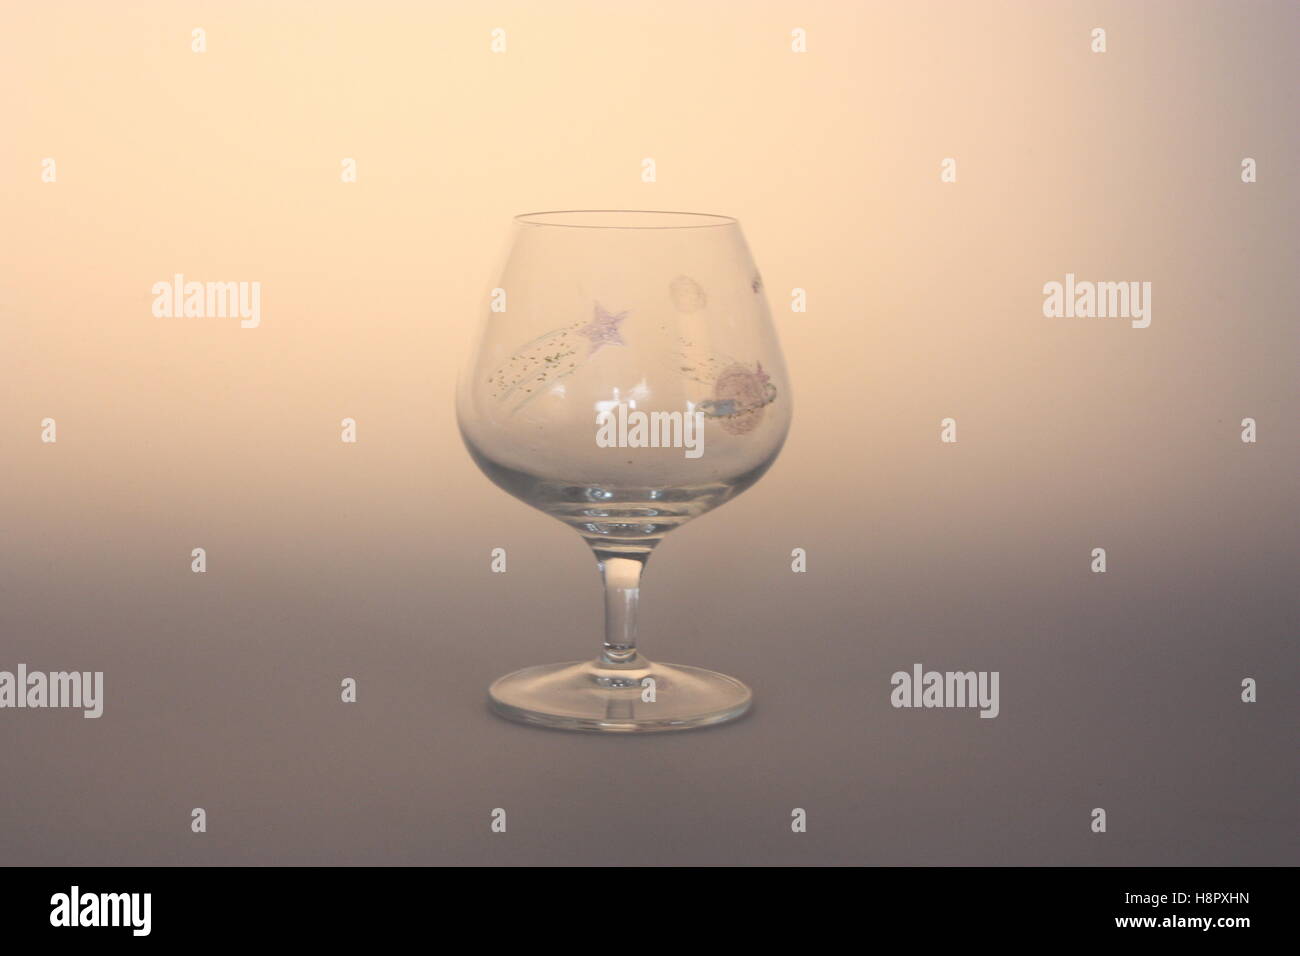 Brandy glass with a space pattern painted on Stock Photo